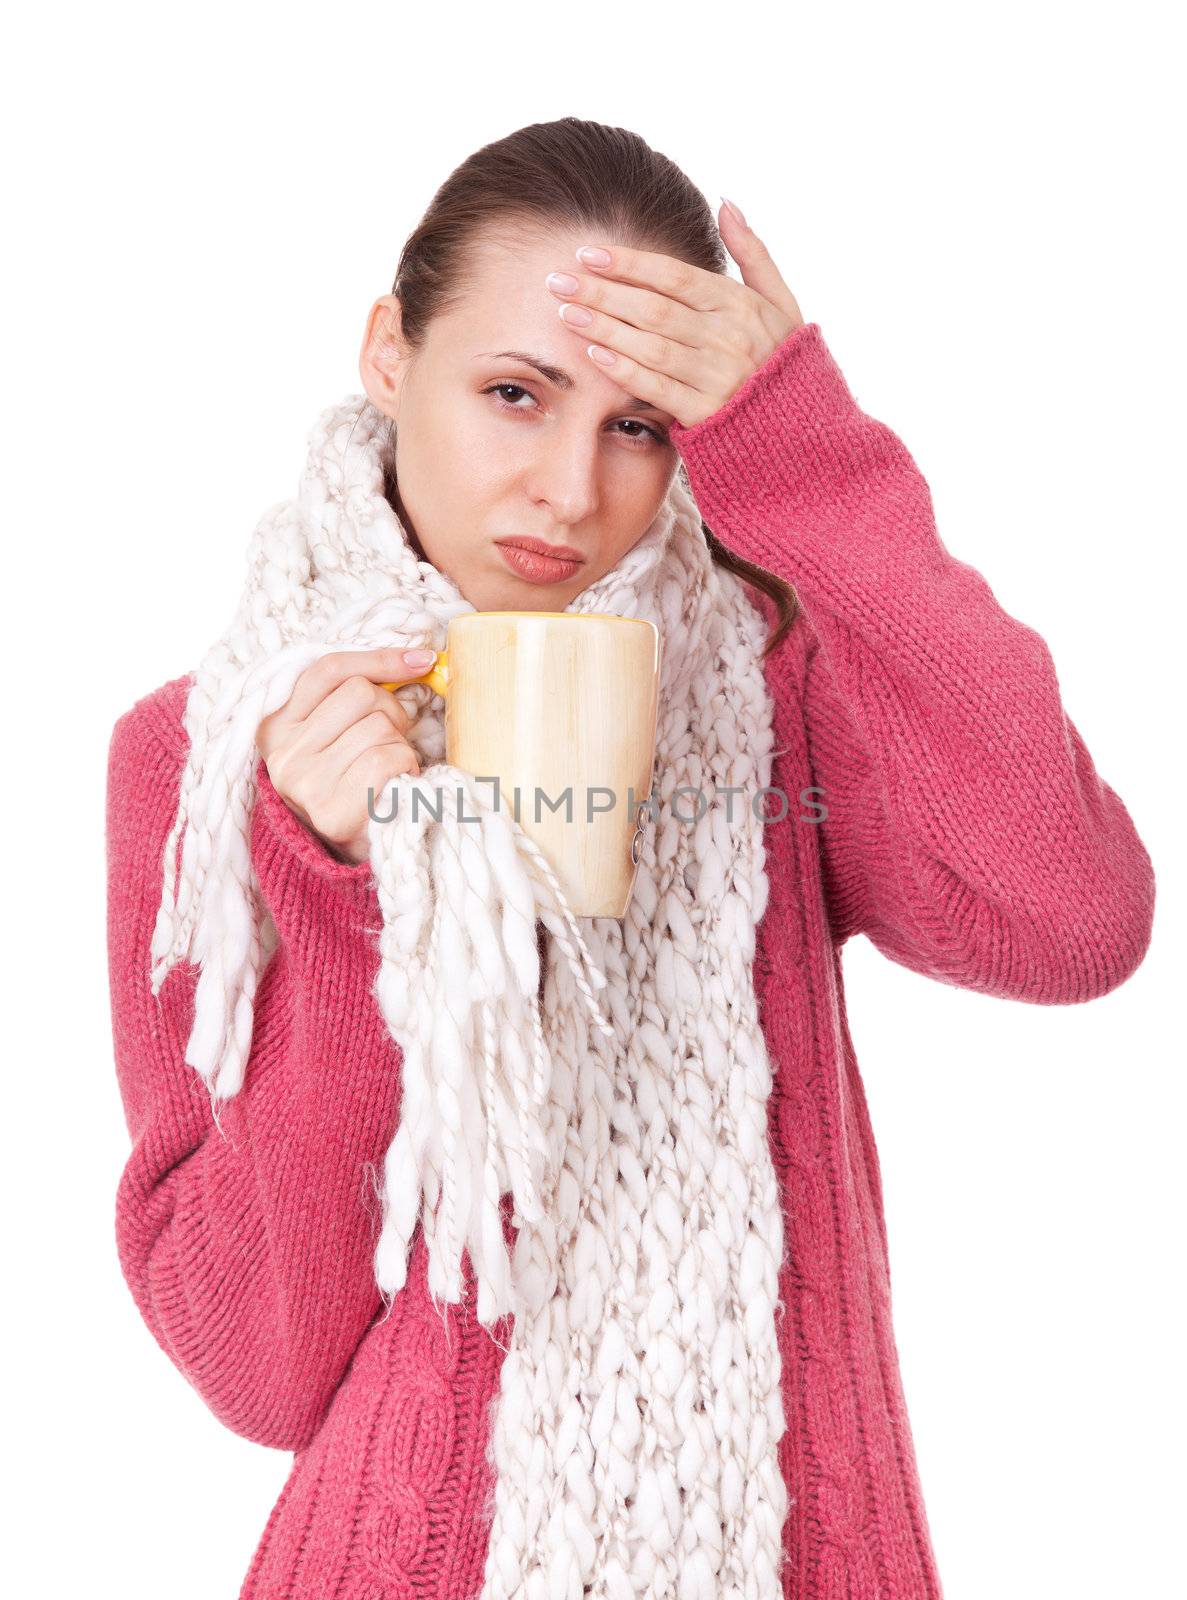 Sick woman with big cup in red winter sweater and scarf on white background